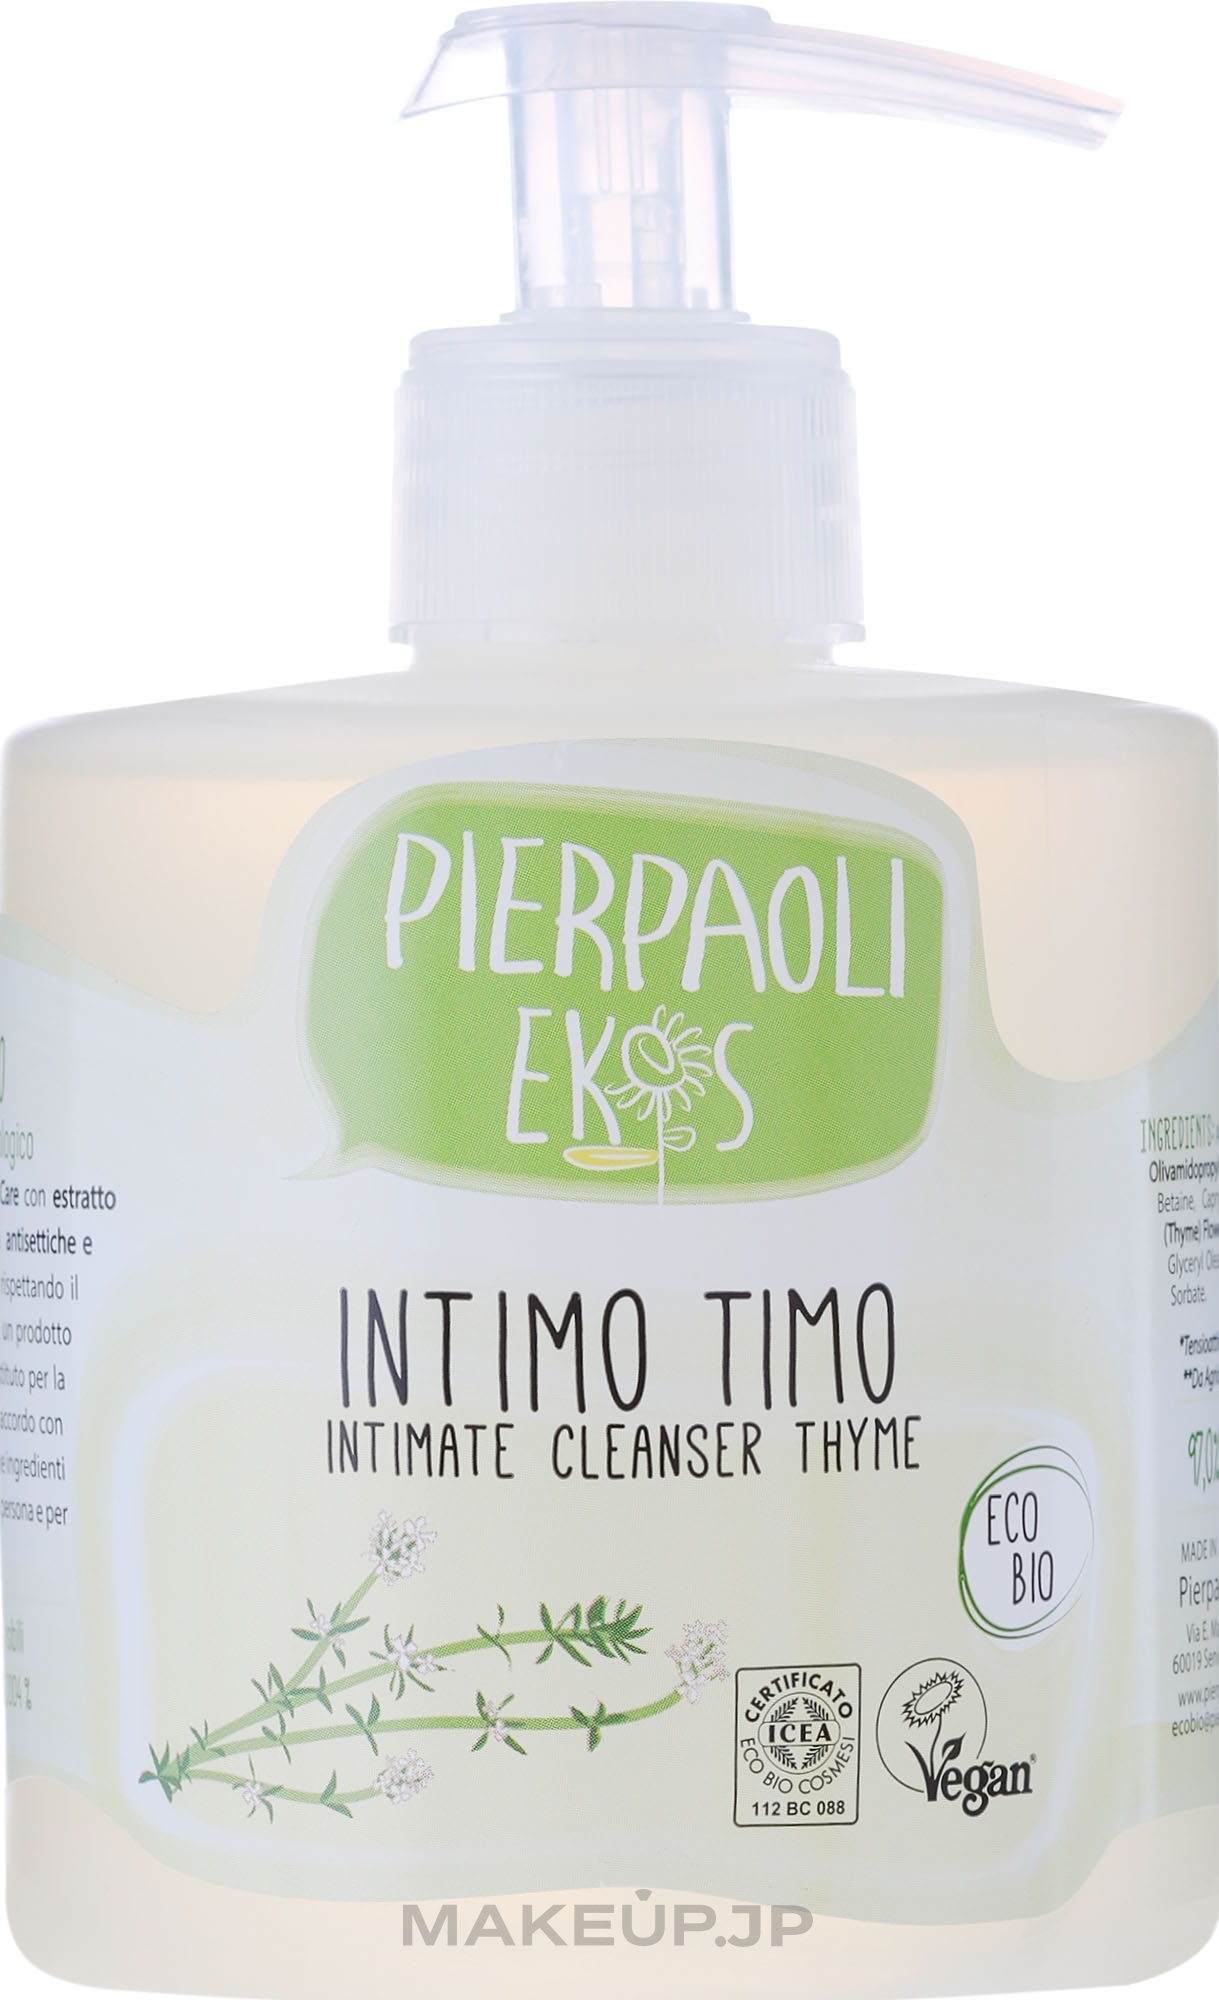 Antibacterial Soap for Intimate Hygiene with Organic Thyme Extract - Ekos Personal Care Thyme Intimate Cleanser (with dispenser) — photo 350 ml